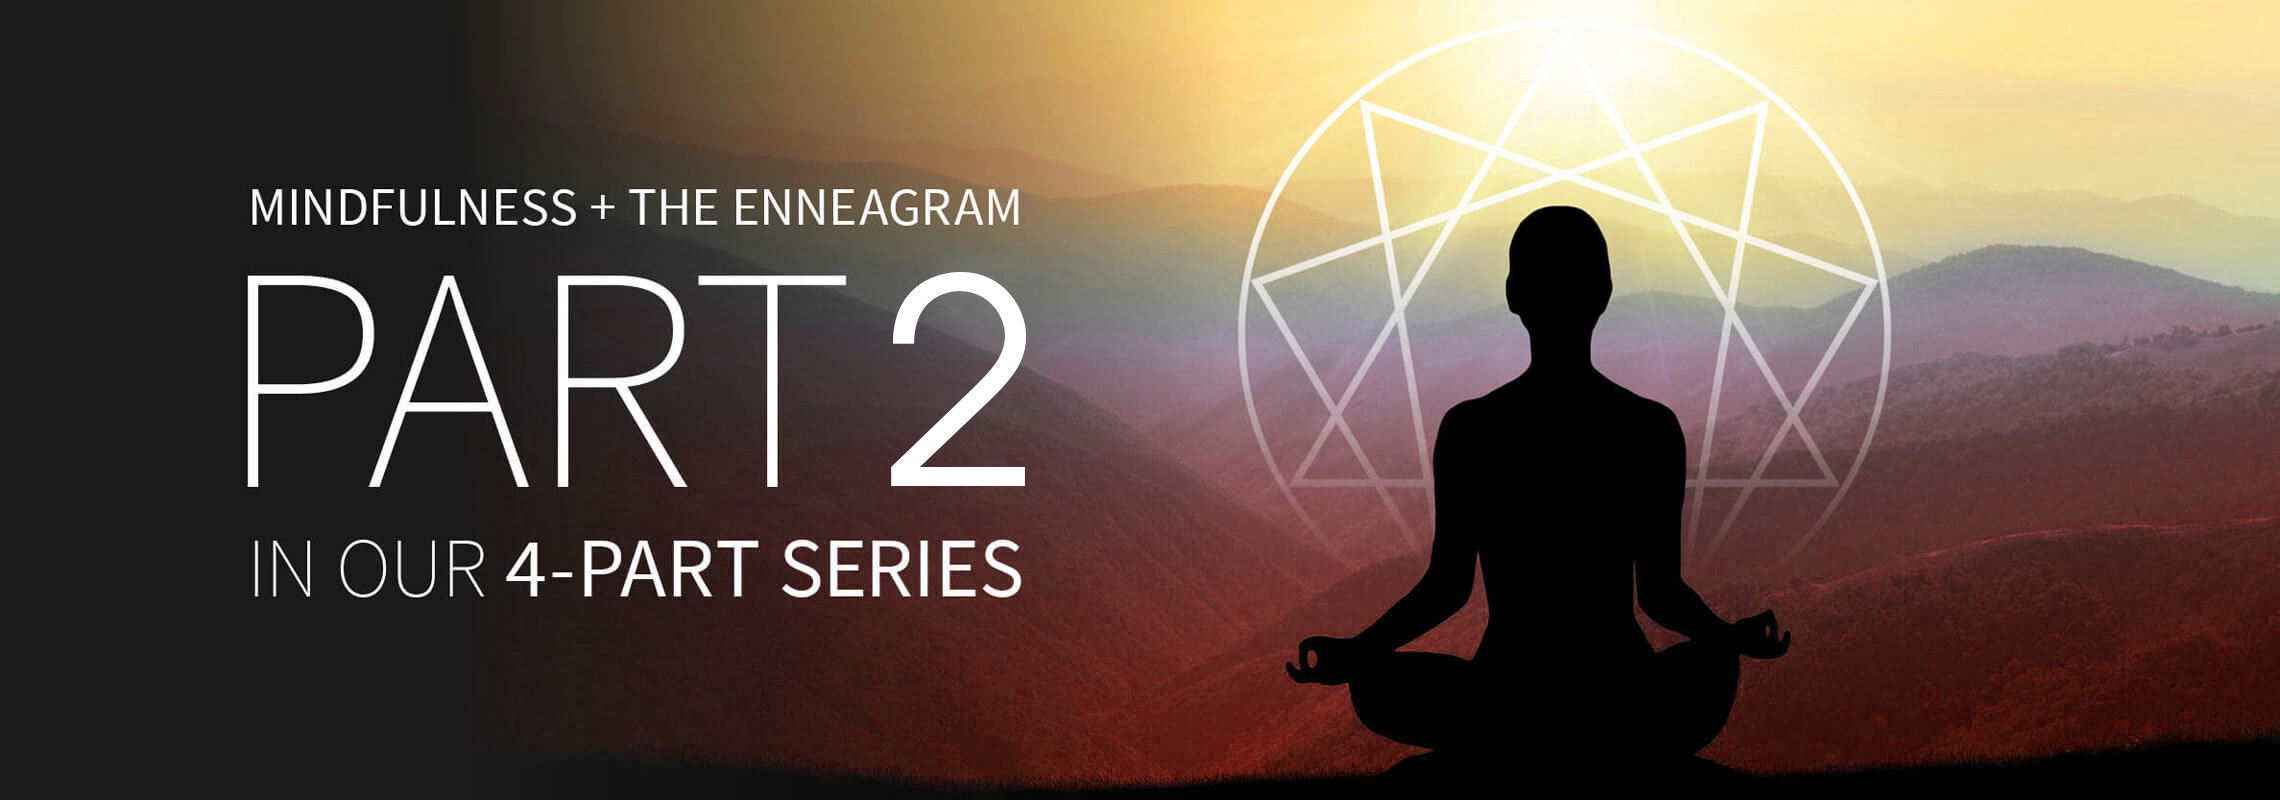 practicing mindfulness with the enneagram